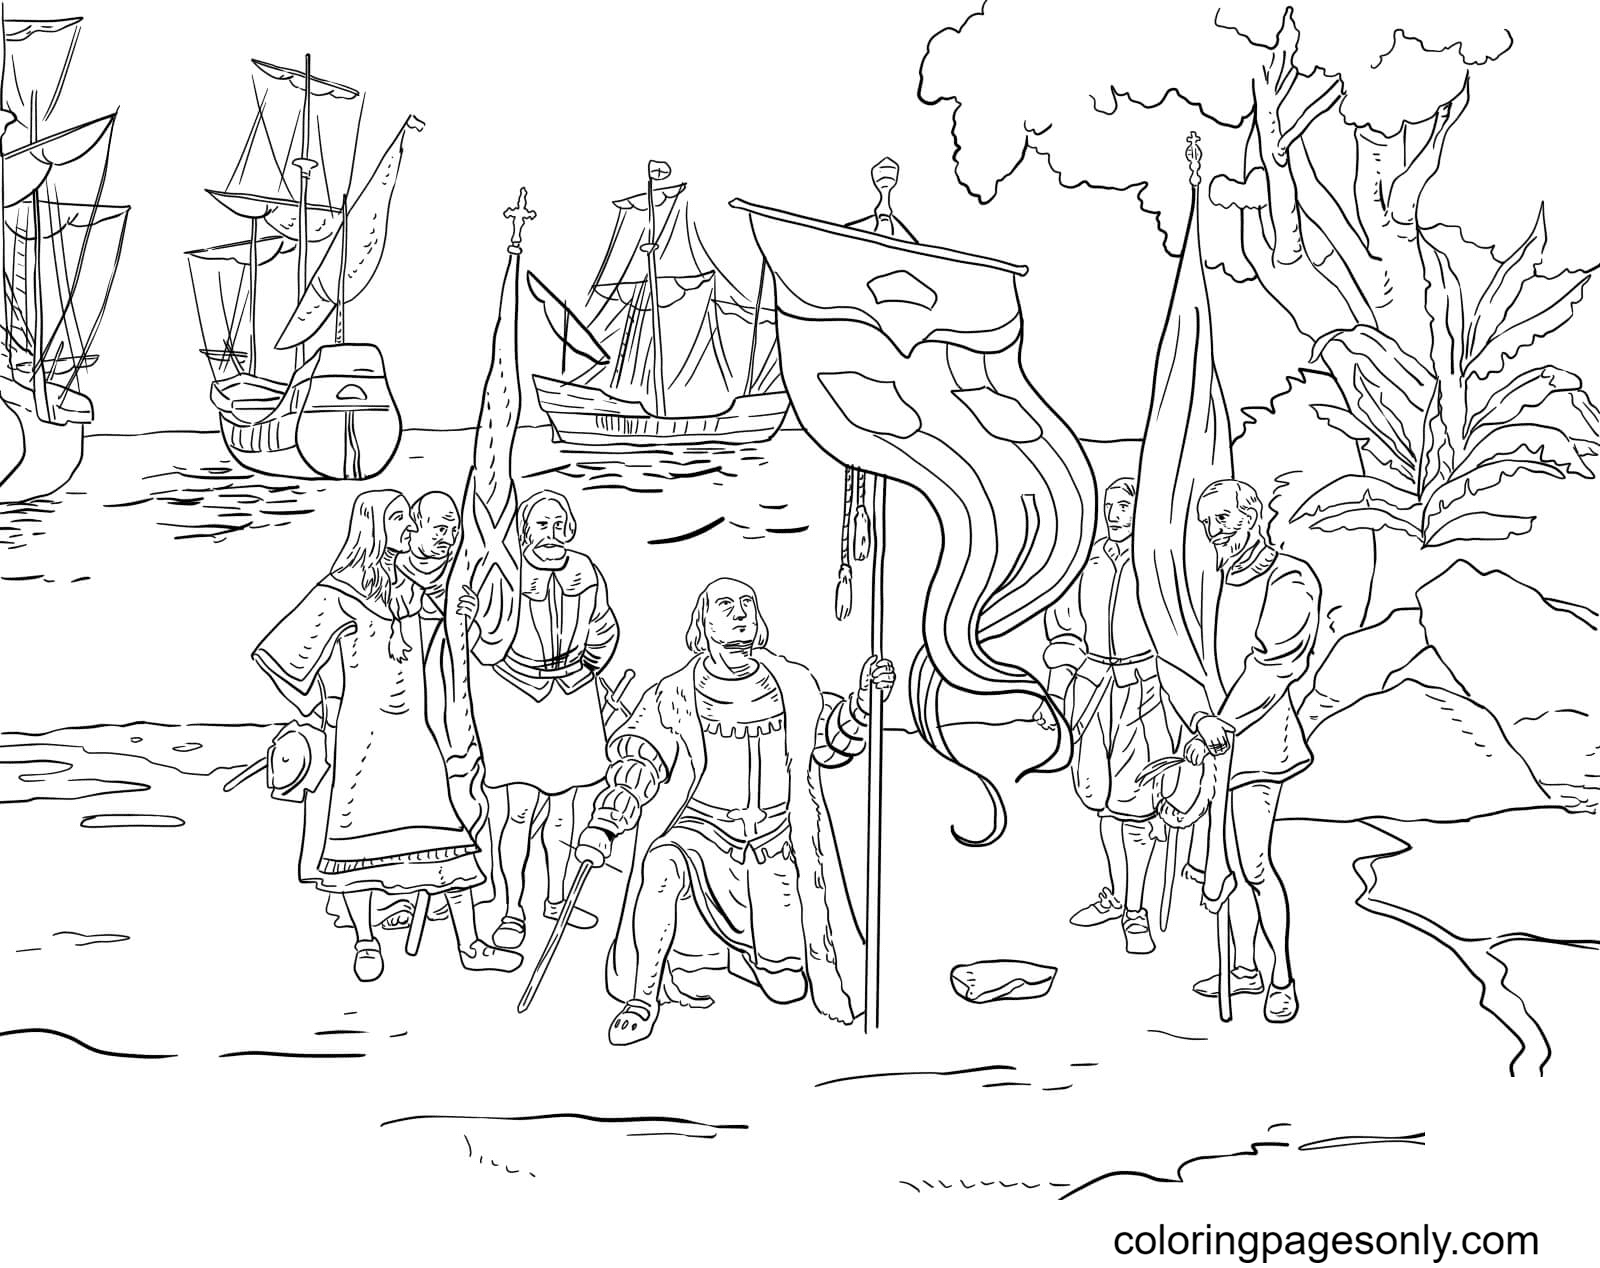 Columbus Taking Possession Coloring Pages